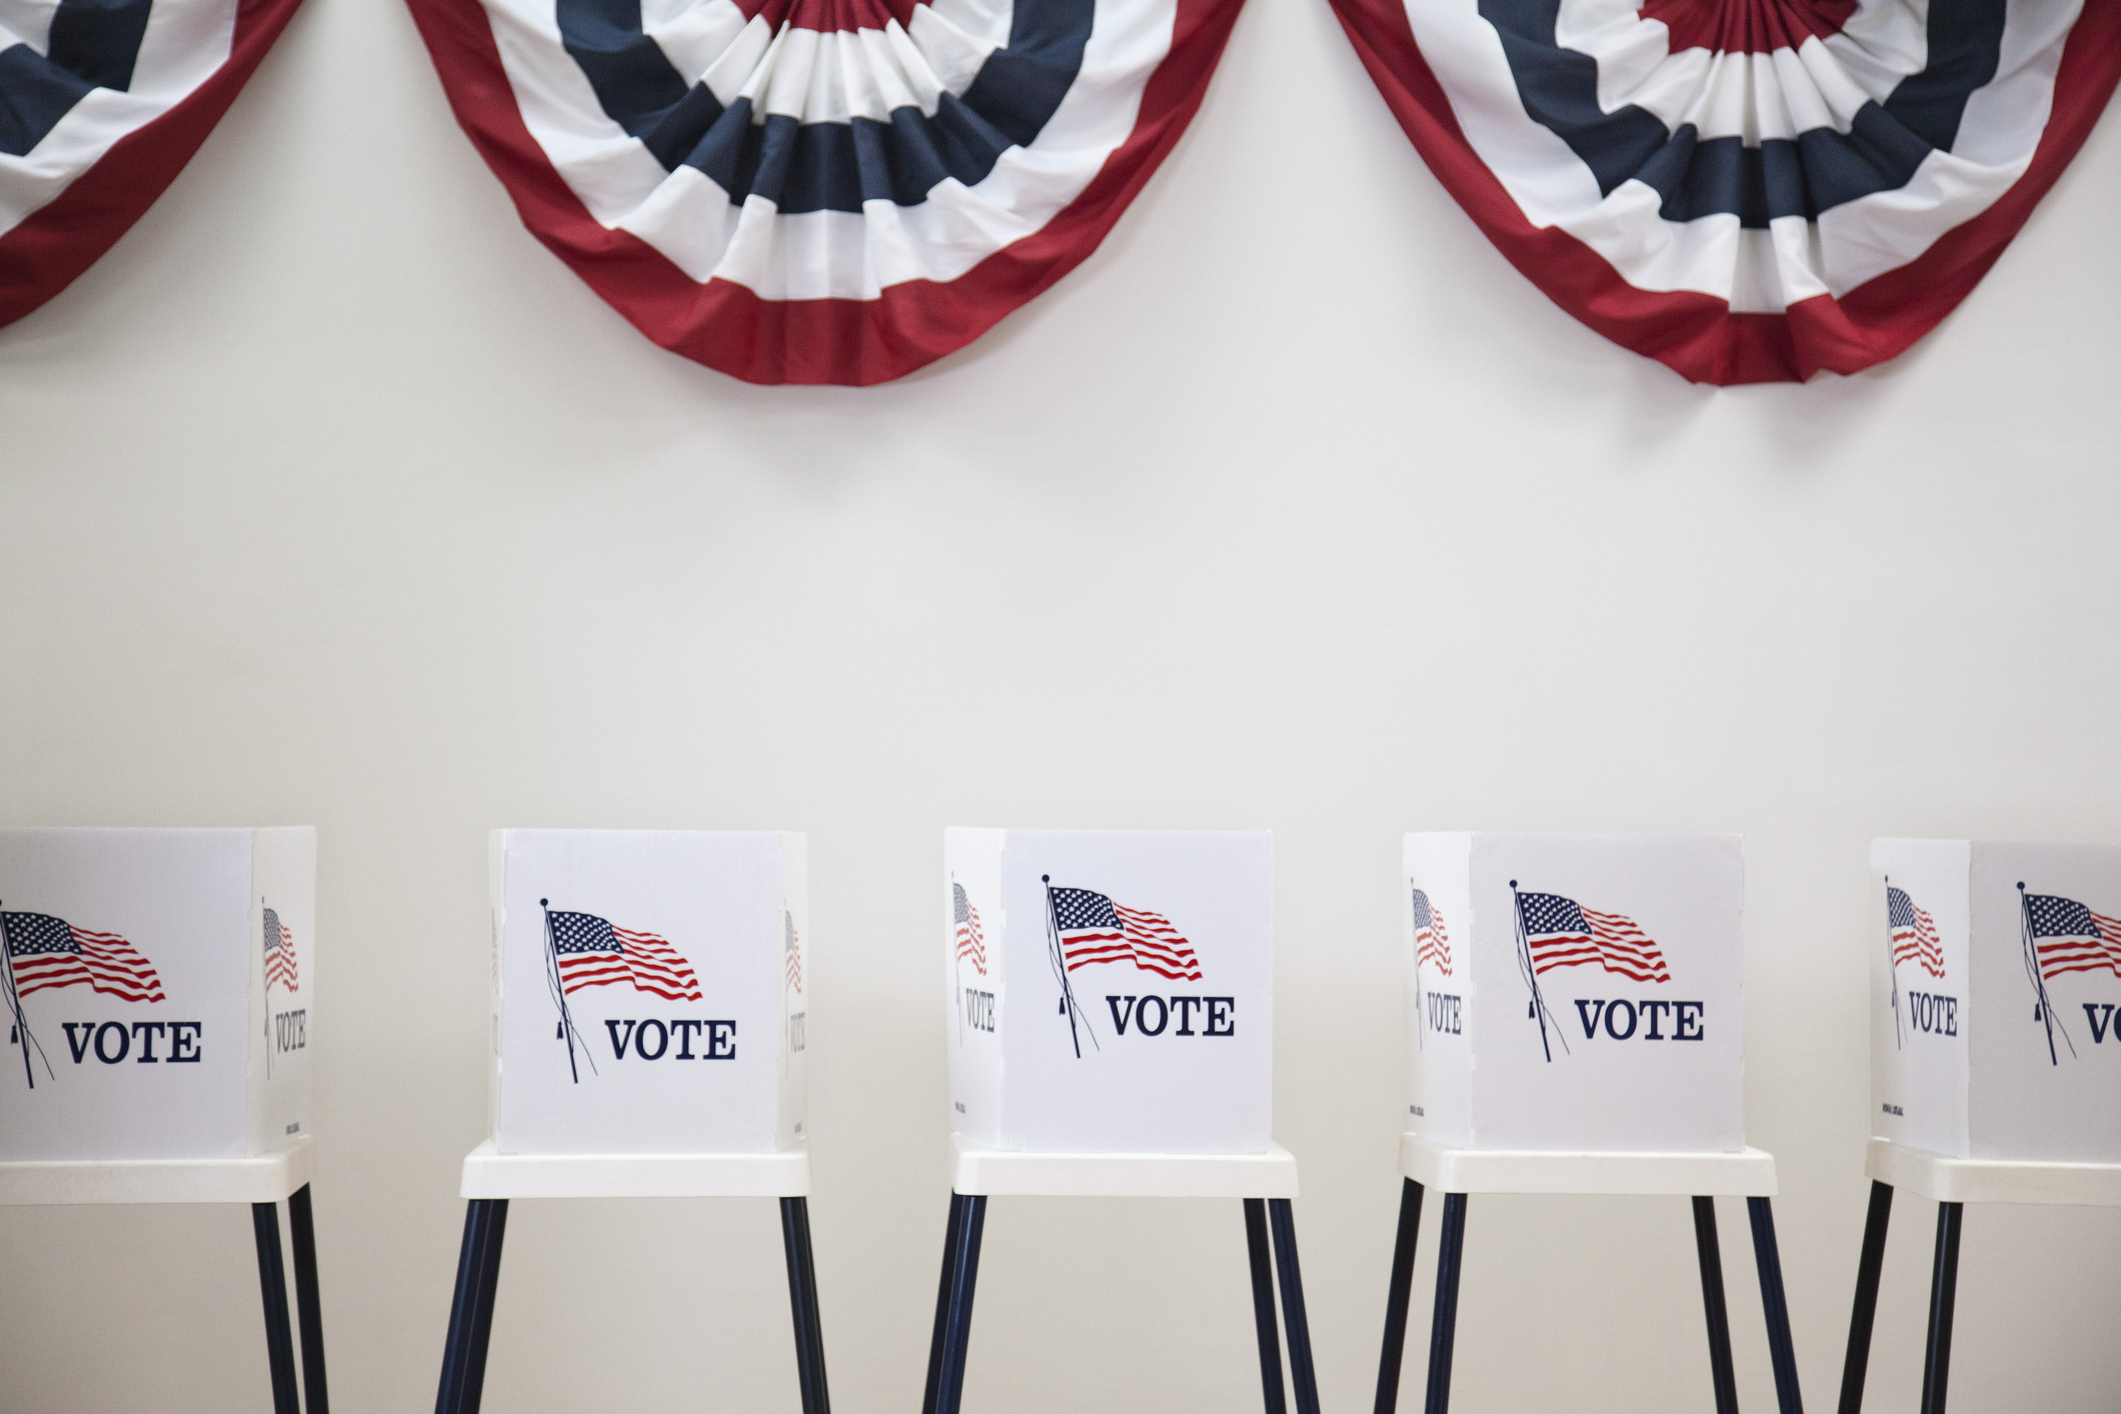 Voting booths in polling place (Getty Images)